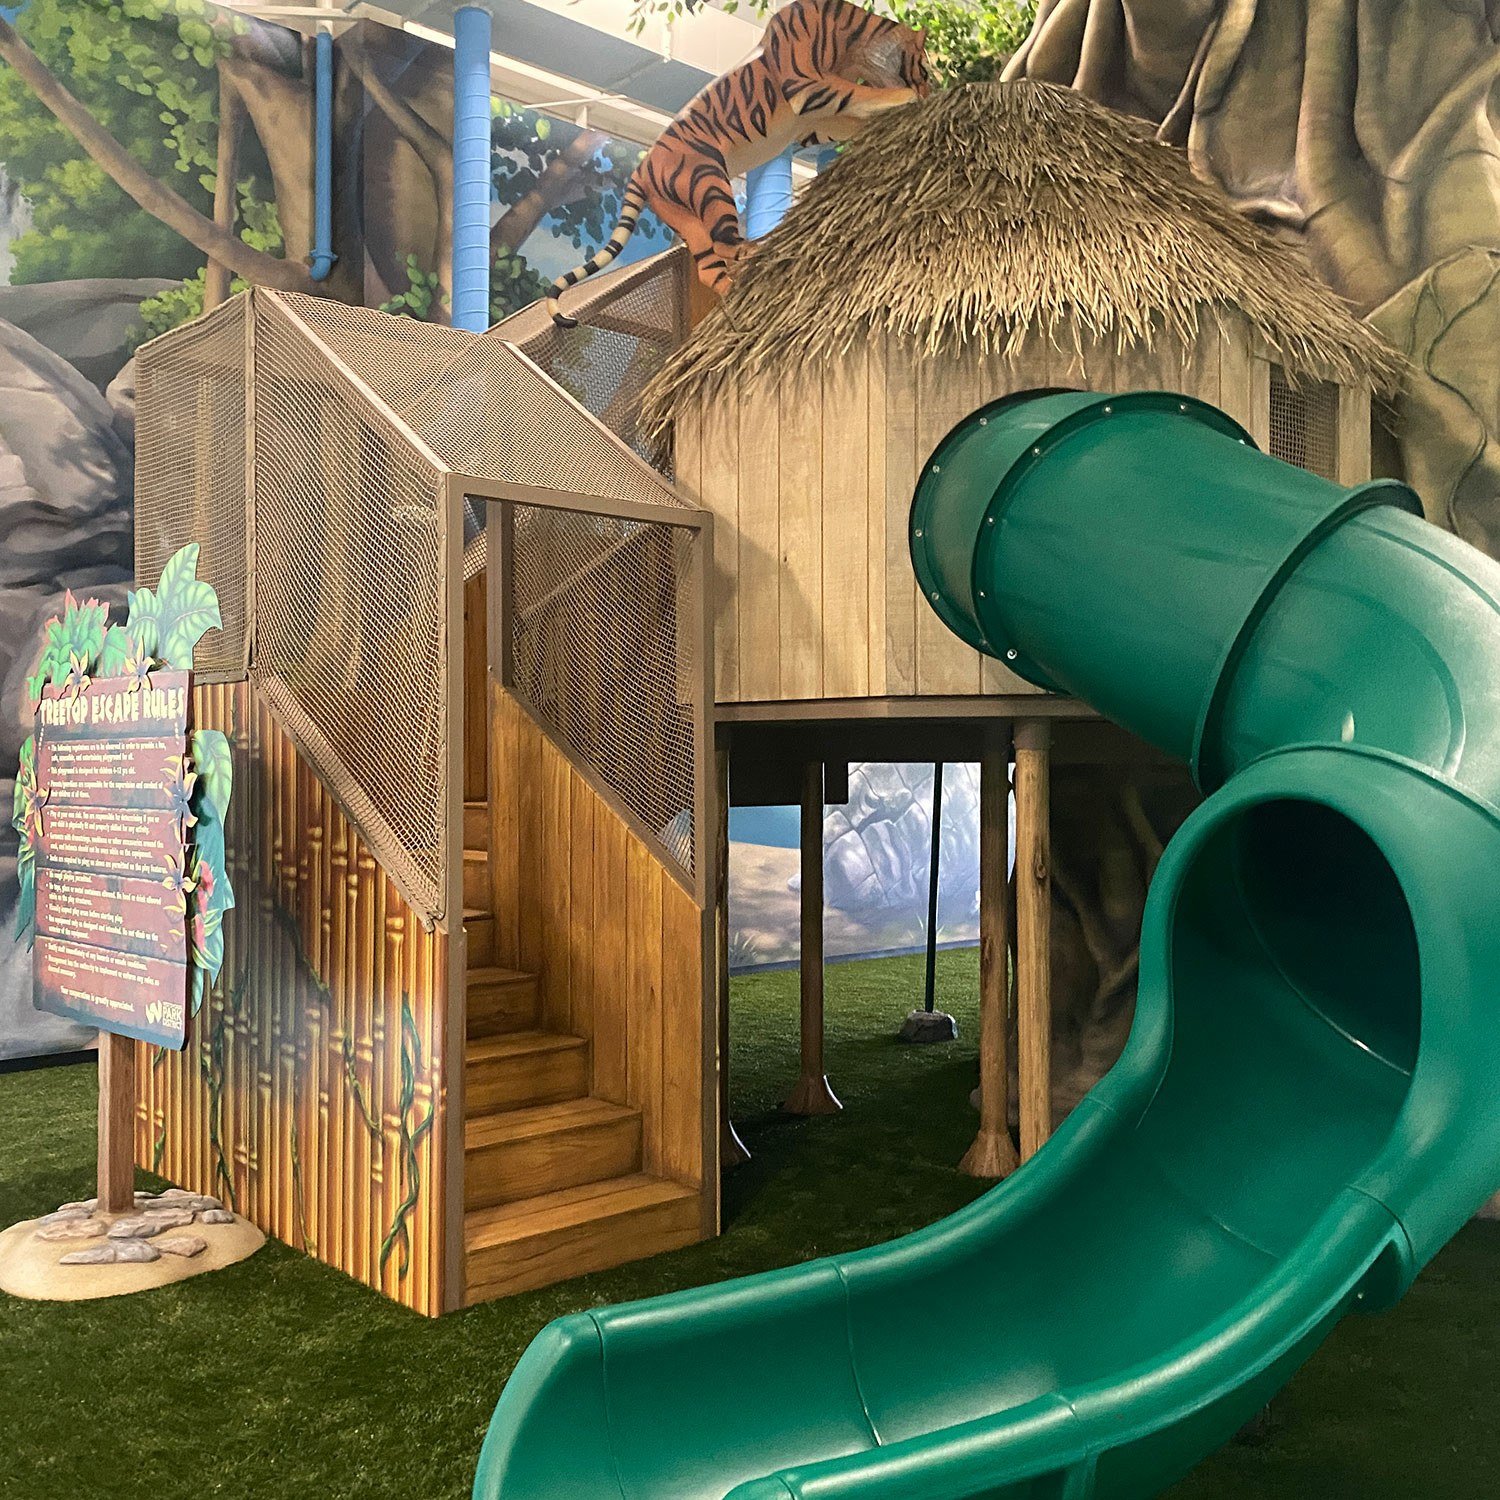 Image of stairs, treehouse and giant green slide